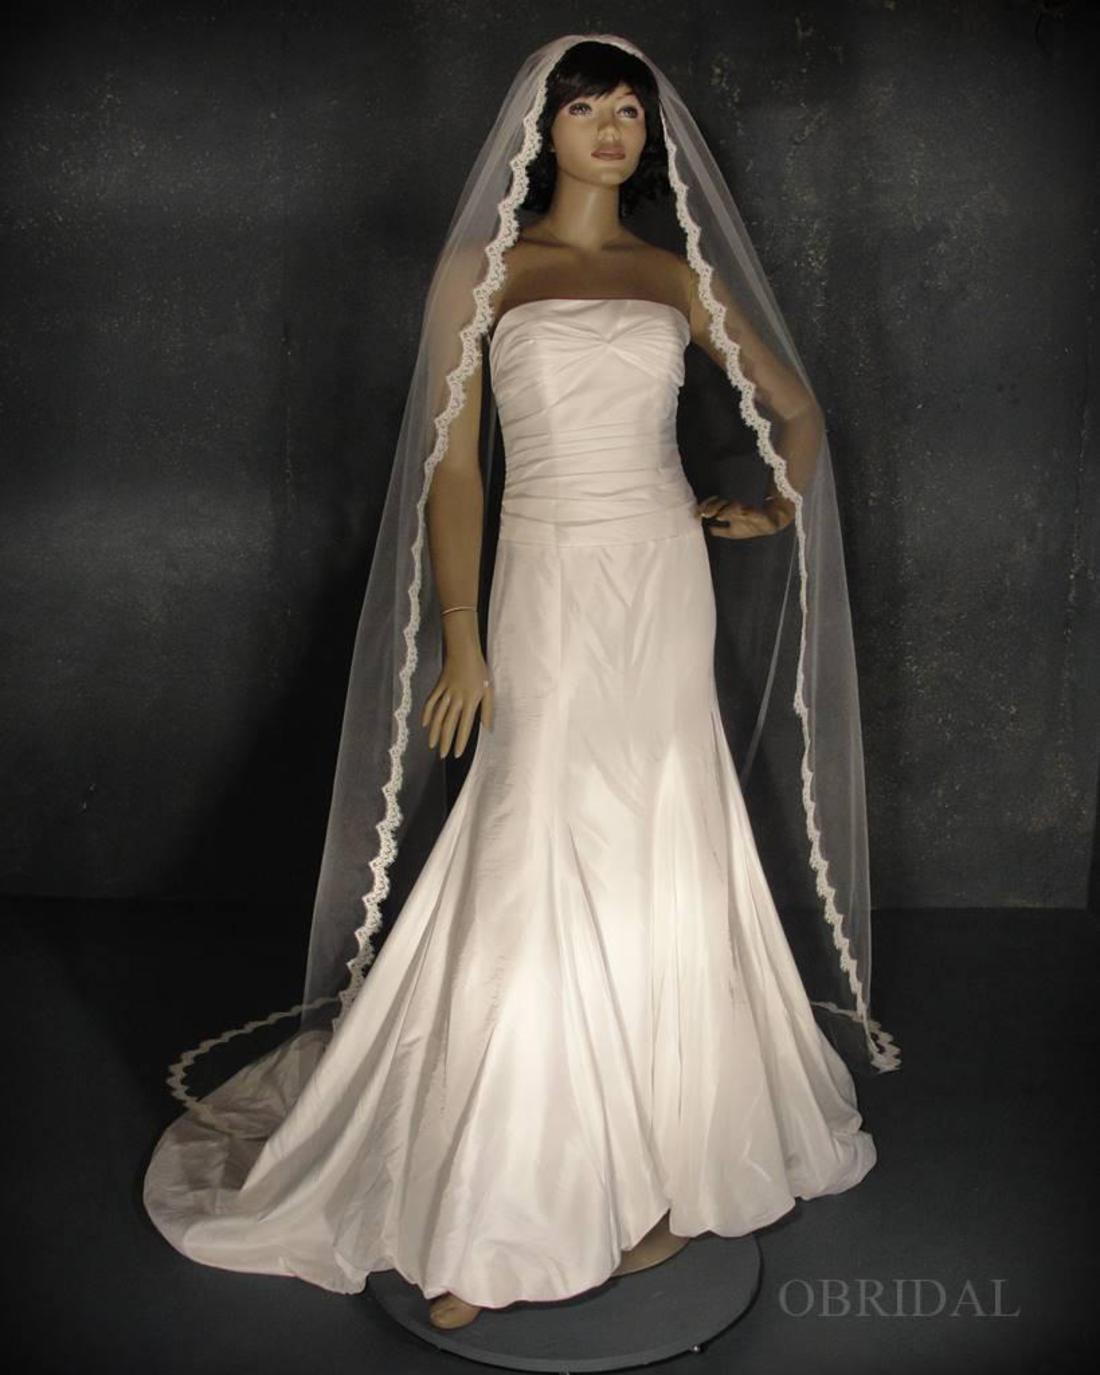 https://pg.b5z.net/get/jb5z/s1100-*/zirw/1/i/u/10242927/i/ec/spl6009-cathedral-lace-veil-thin-french-lace-010.JPG